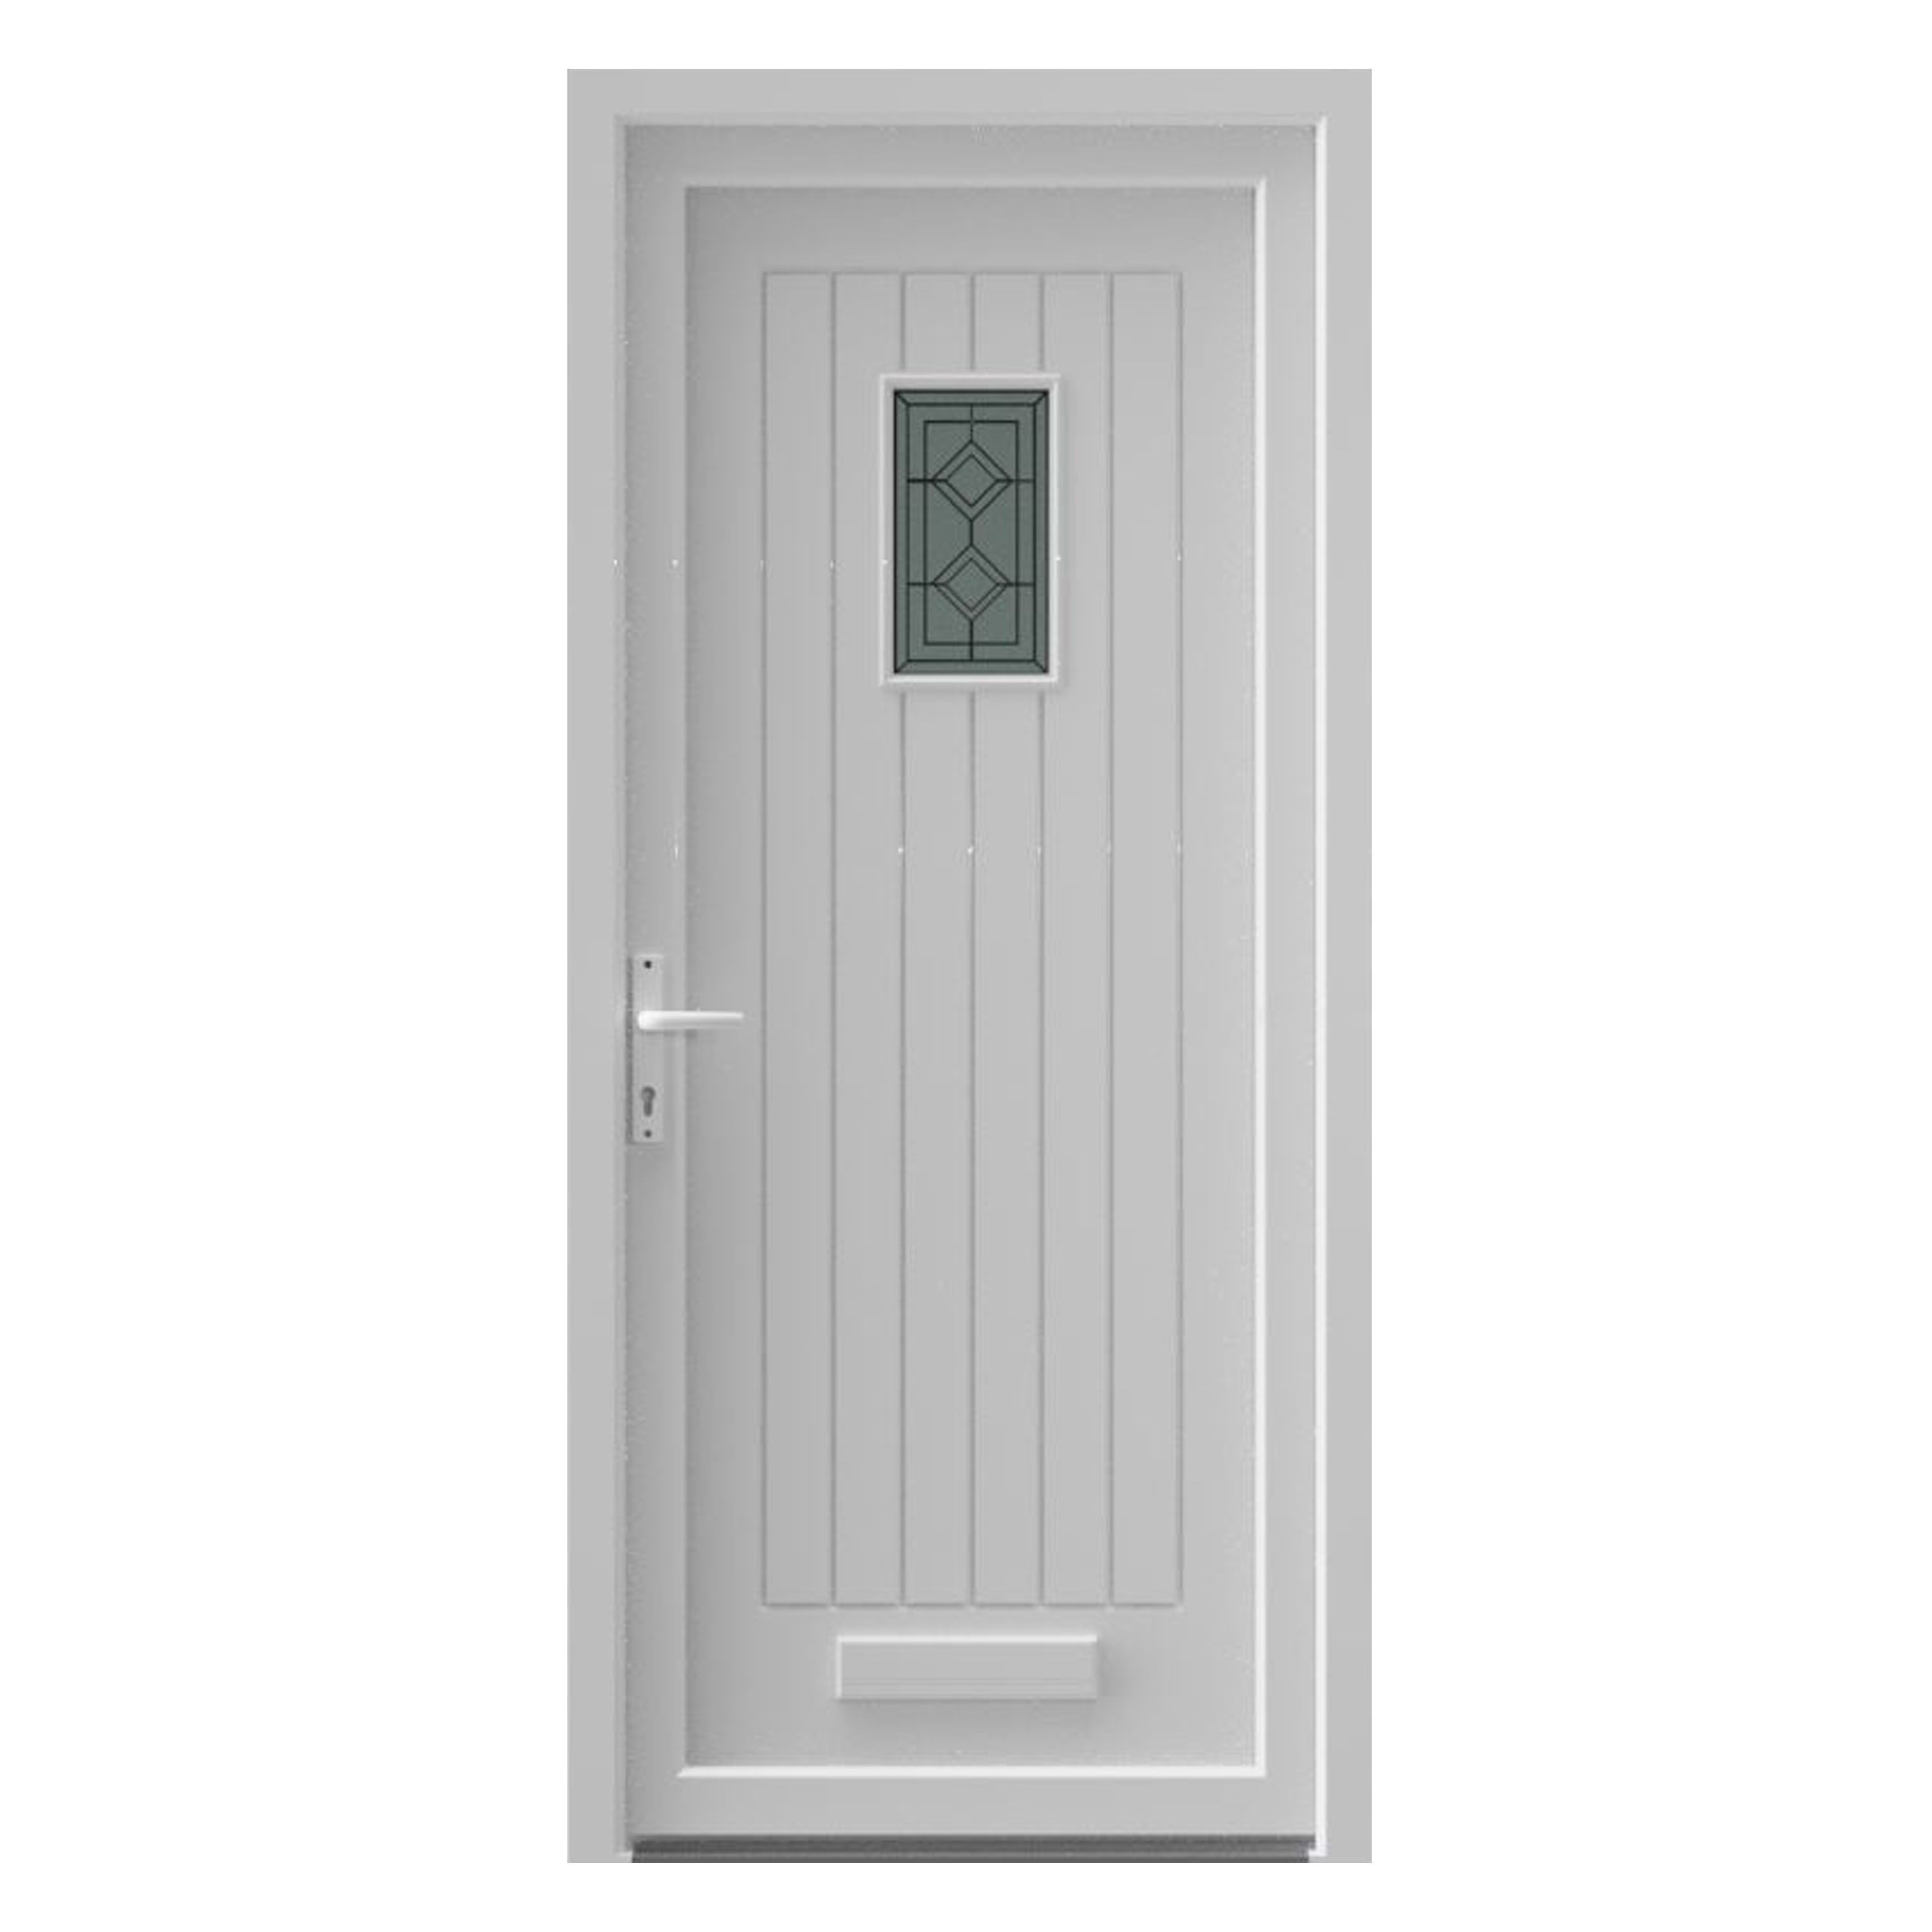 Fortia Curral Frosted Glazed White RH External Front Door set, (H)2085mm (W)920mm